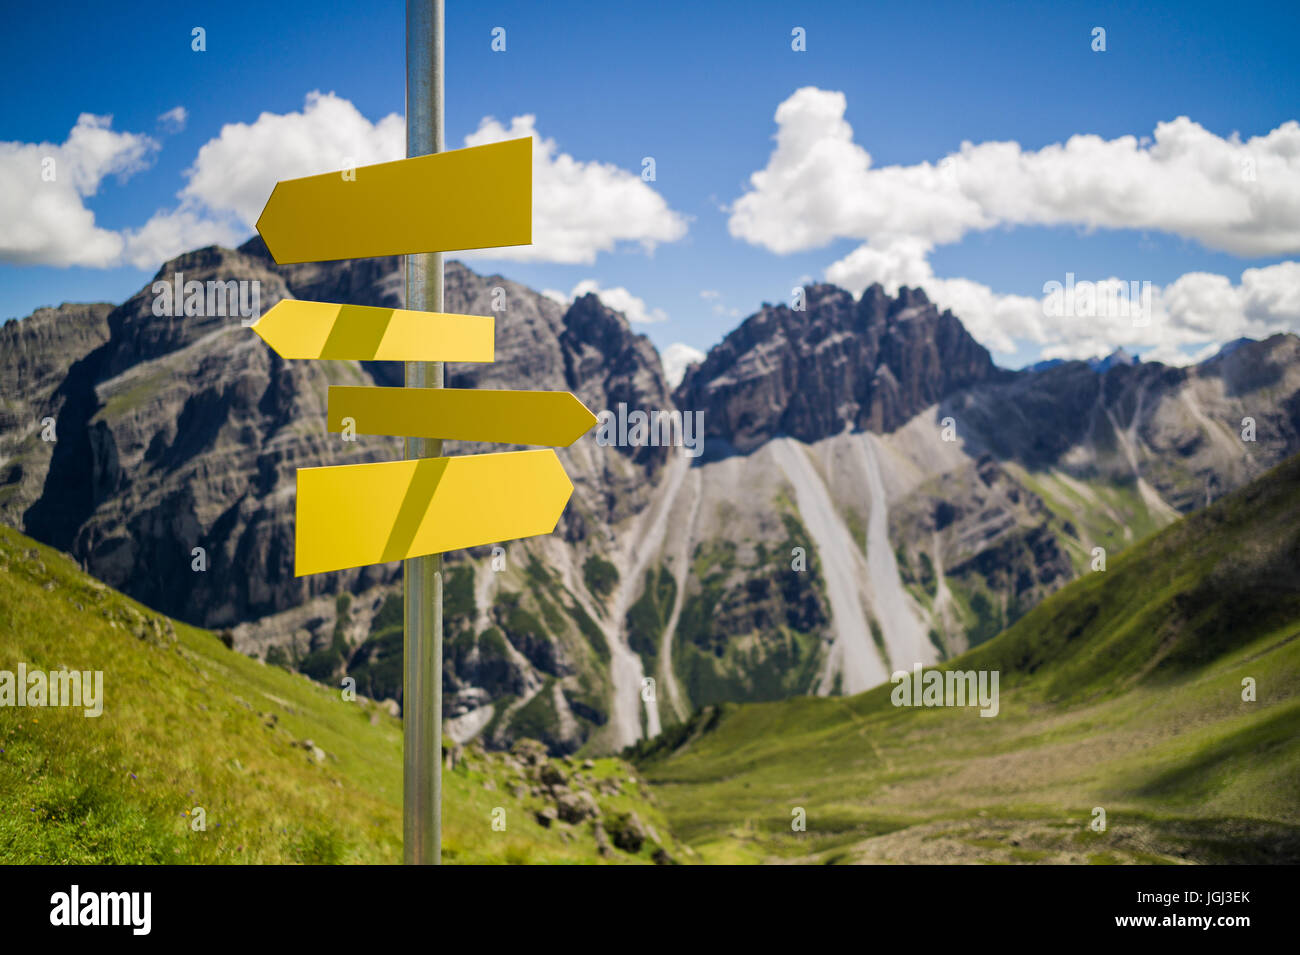 Blank hiking signs on a pole in front of a blurred landscape with mountains and blue sky Stock Photo